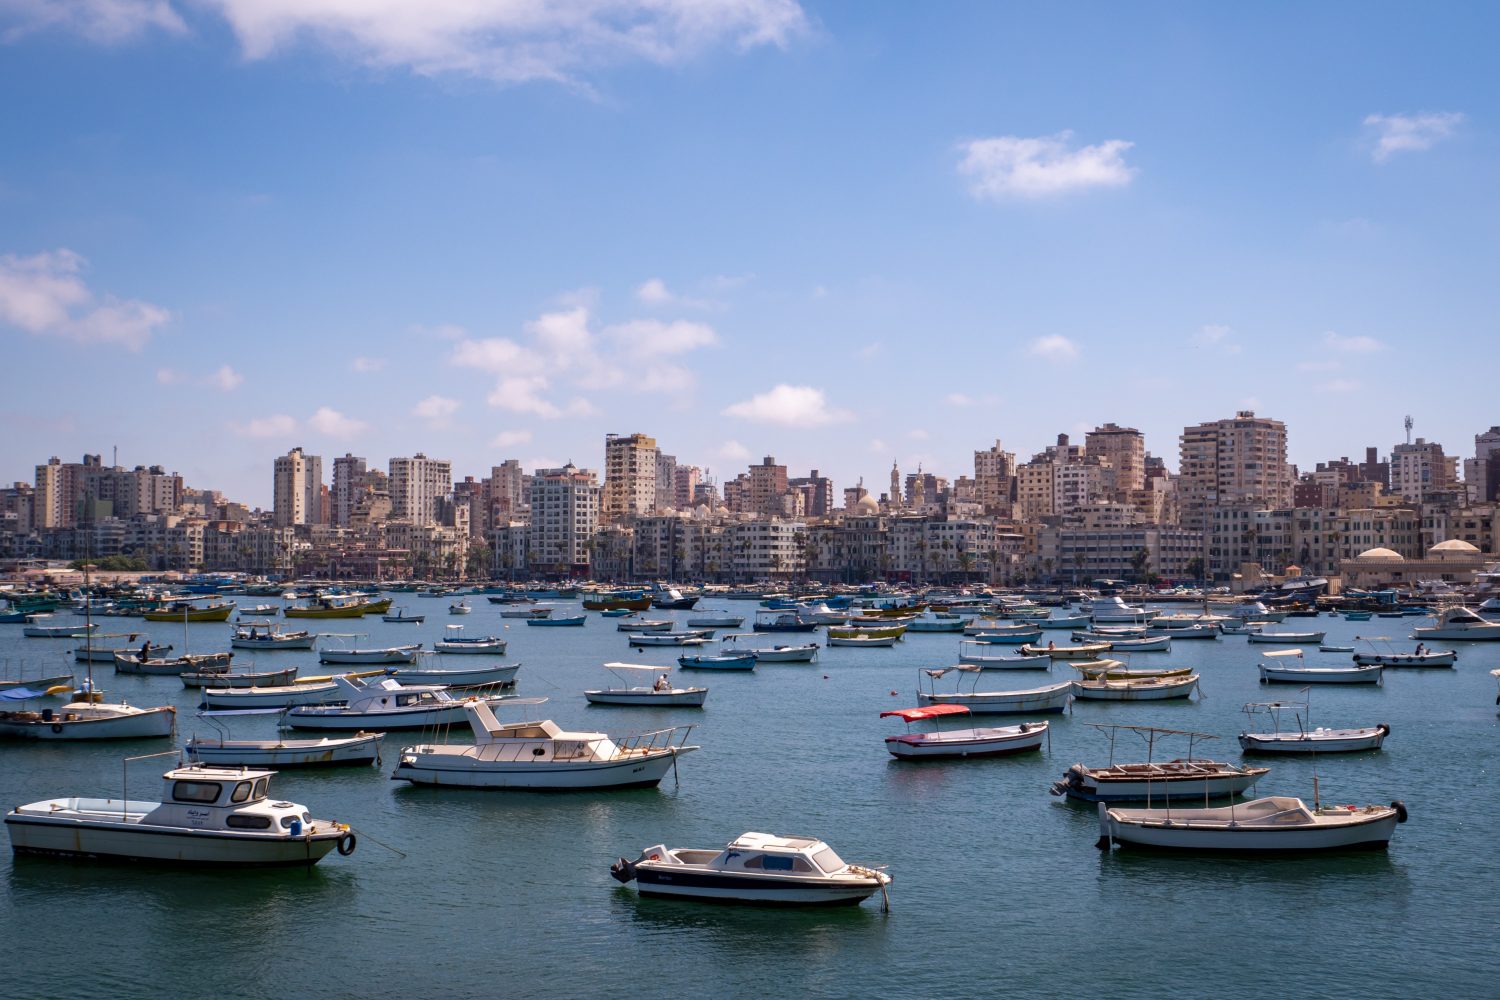 the harbour with many boats and skyline of alexandria - view from the citadel